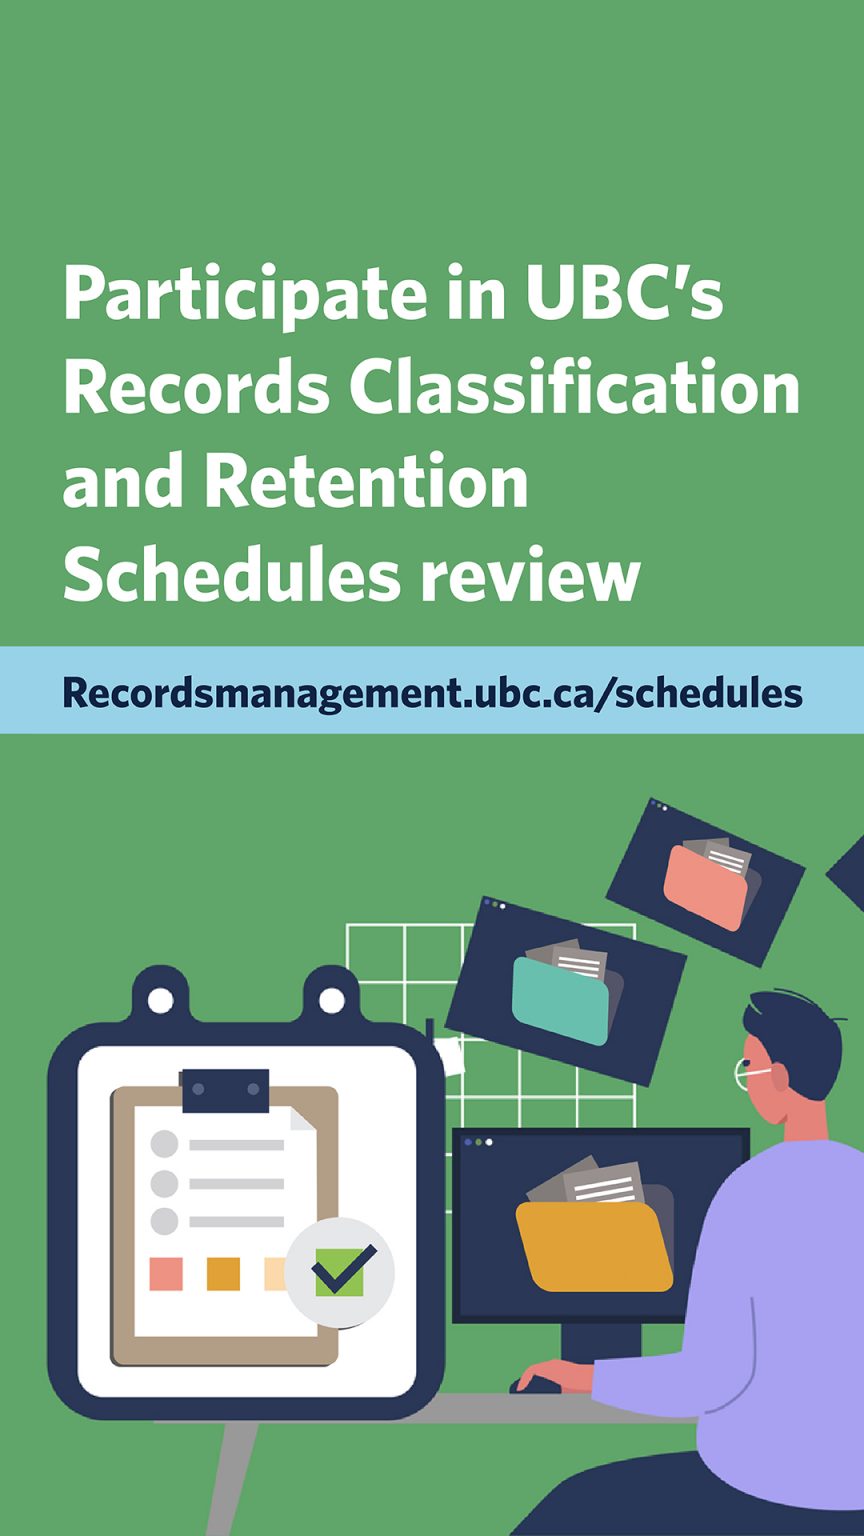 Complete Overhaul Planned for UBC’s Records Retention Schedules